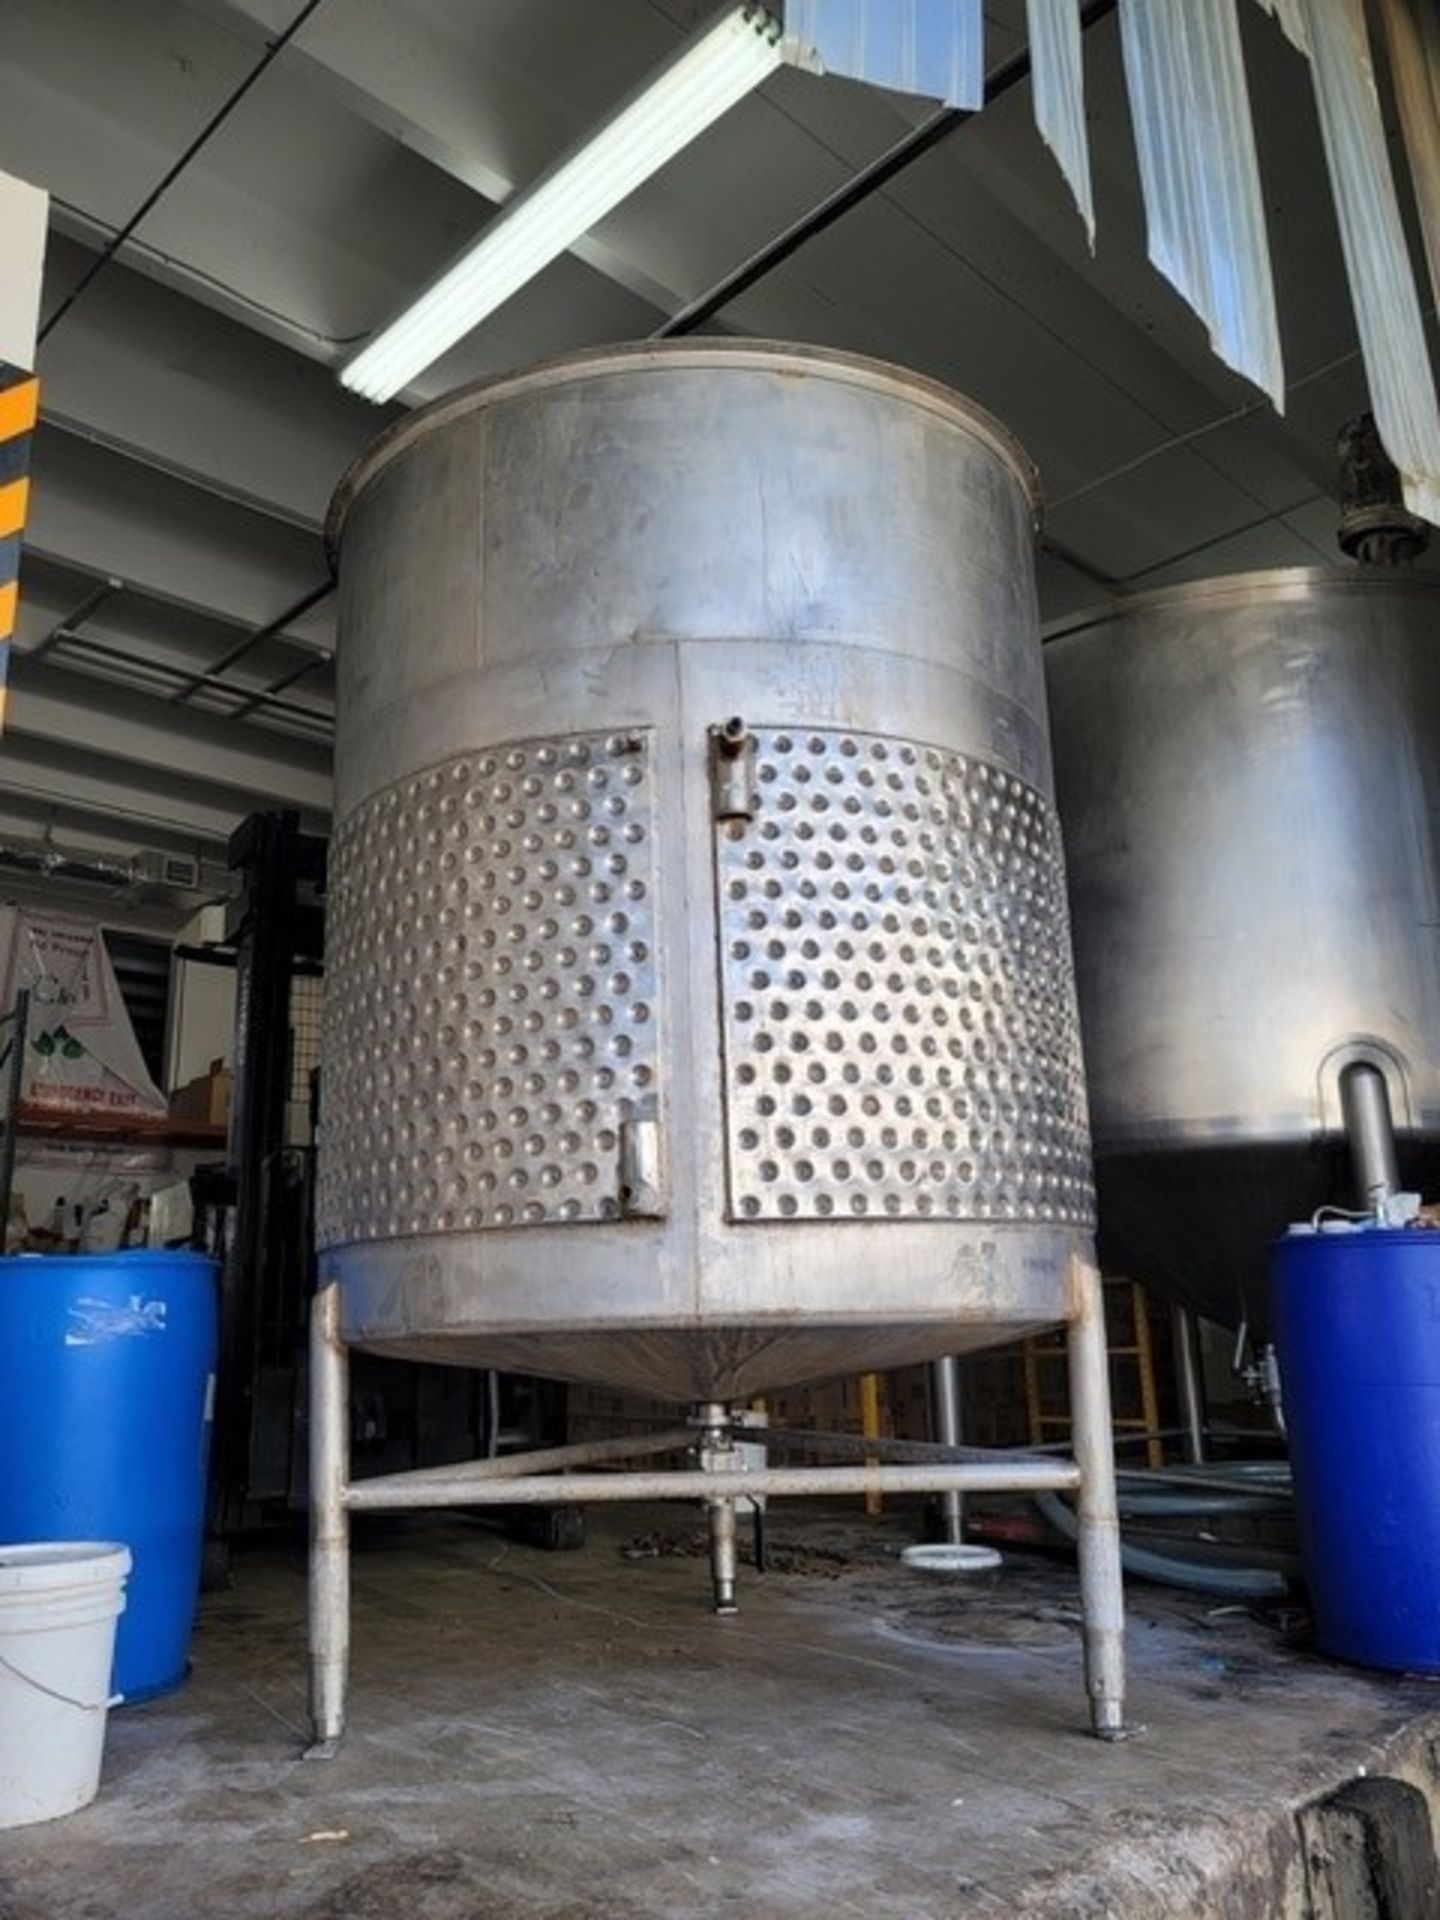 Aprox 1000 Gallon Dimple Jacketed Tank (NOTE Missing Motor) -- Sold As Is Where Is NOTE: Buyer